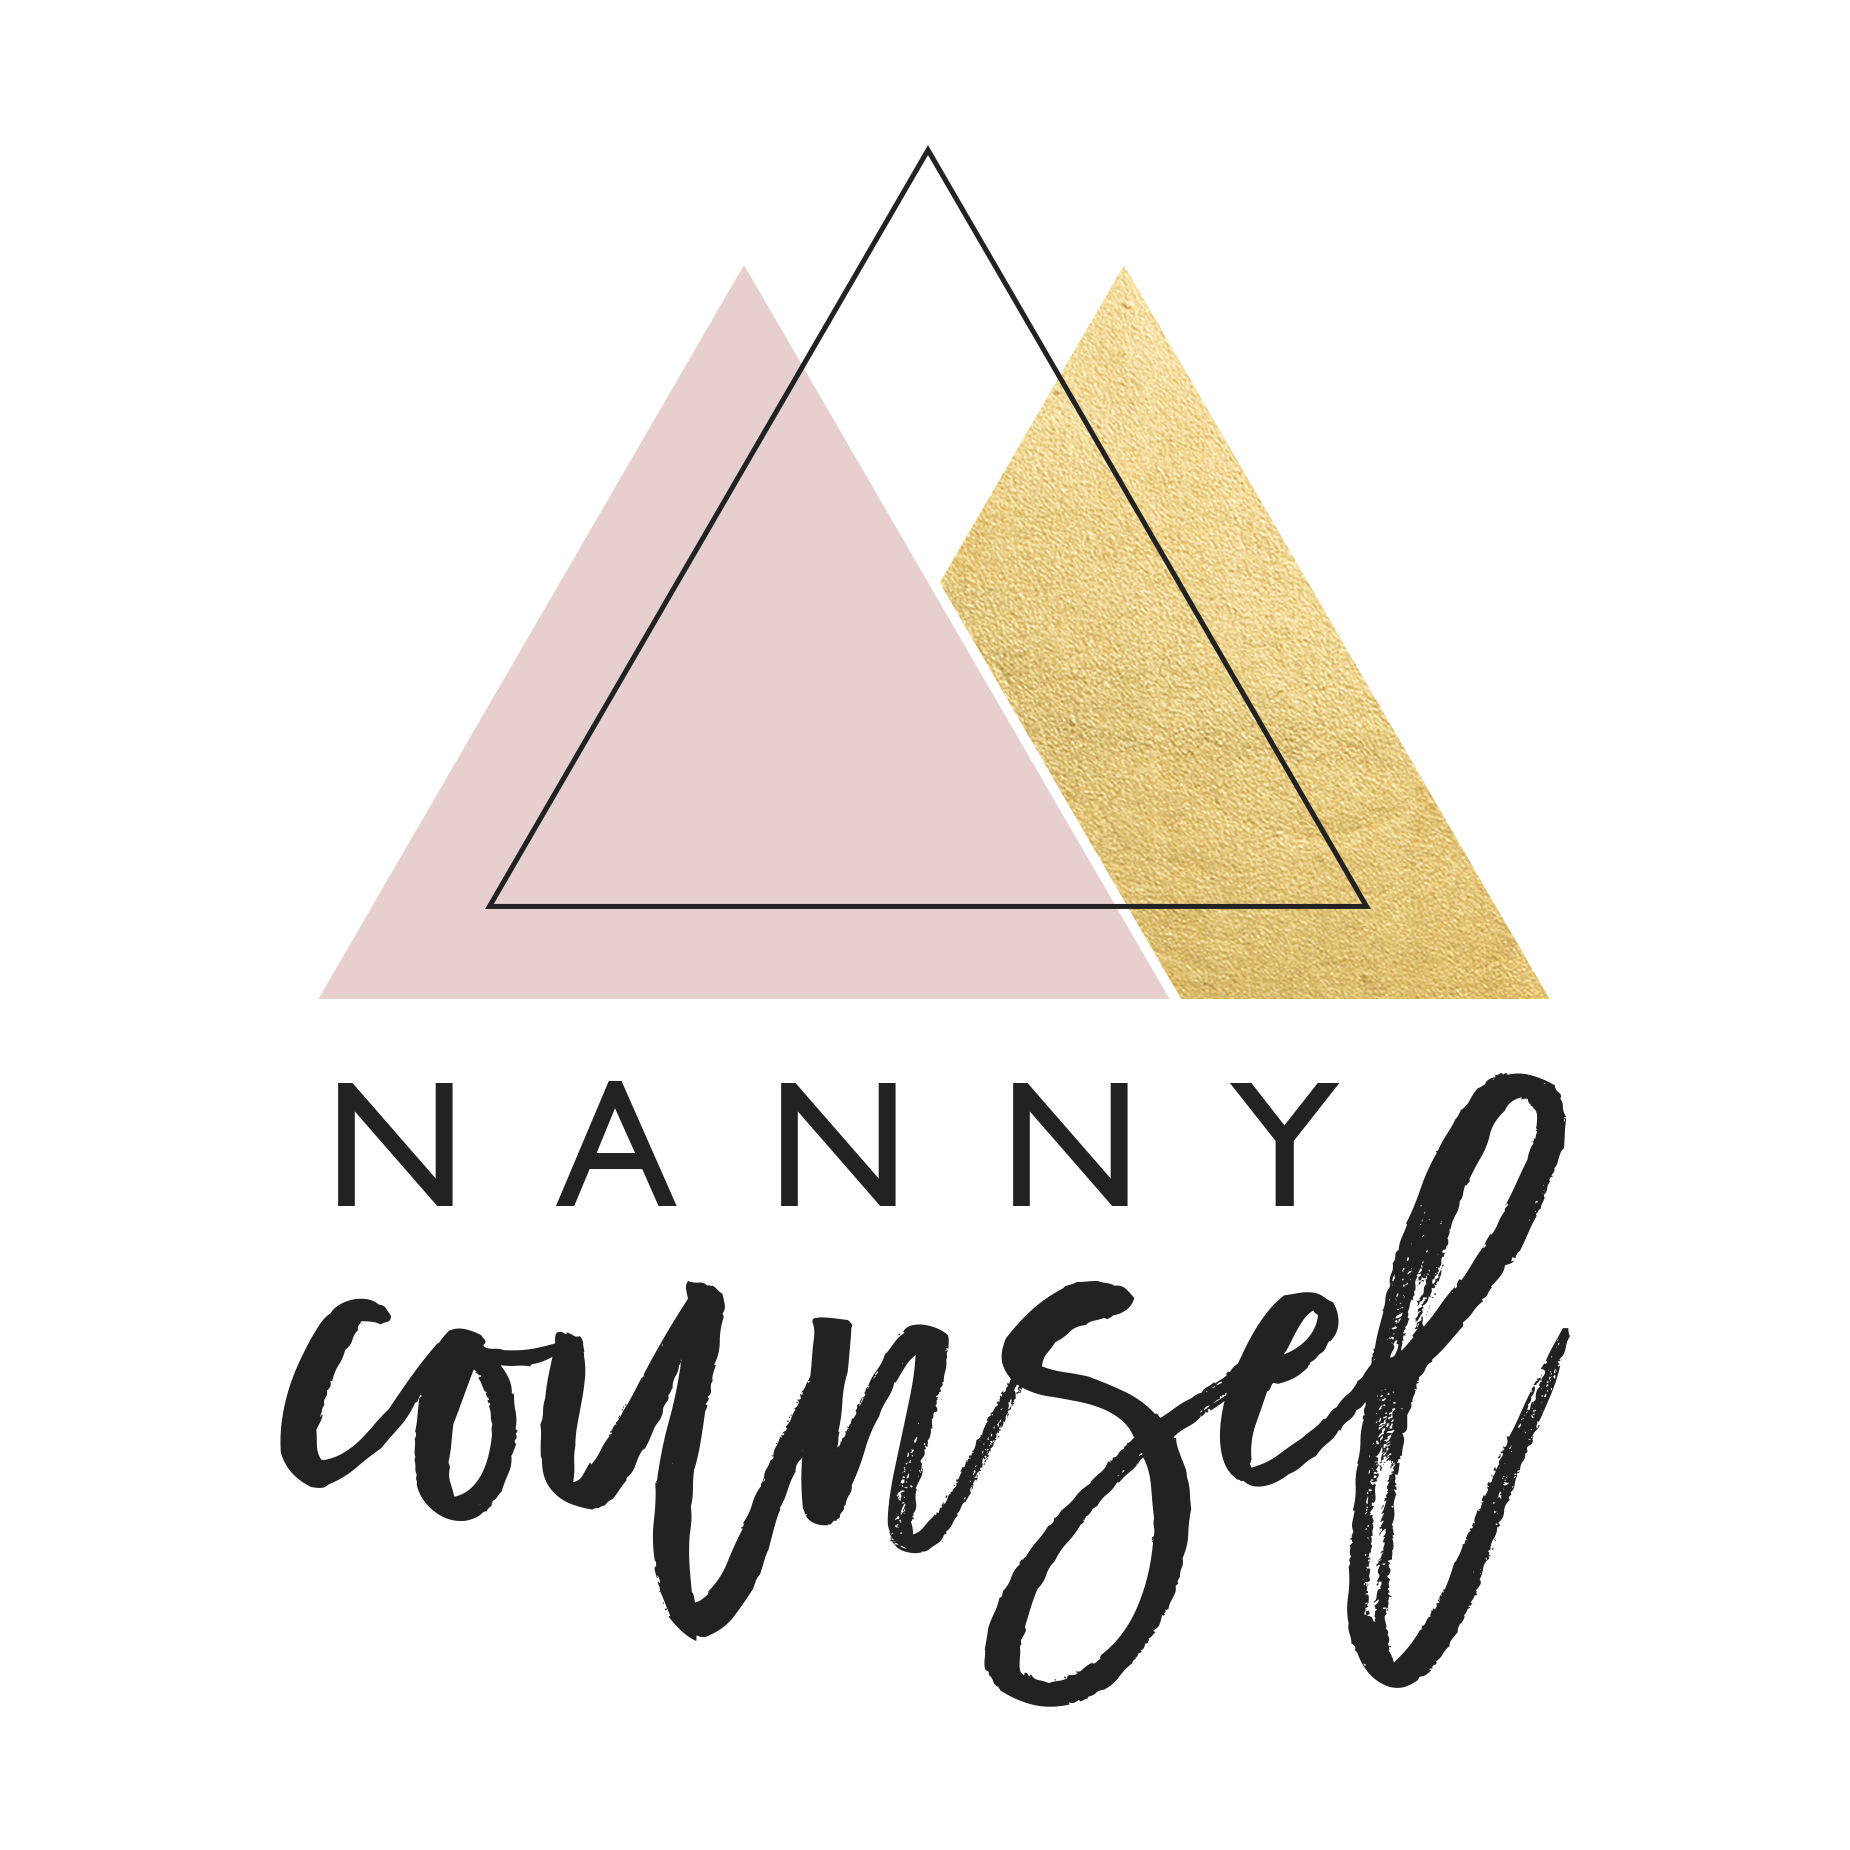 Nanny Counsel Families!